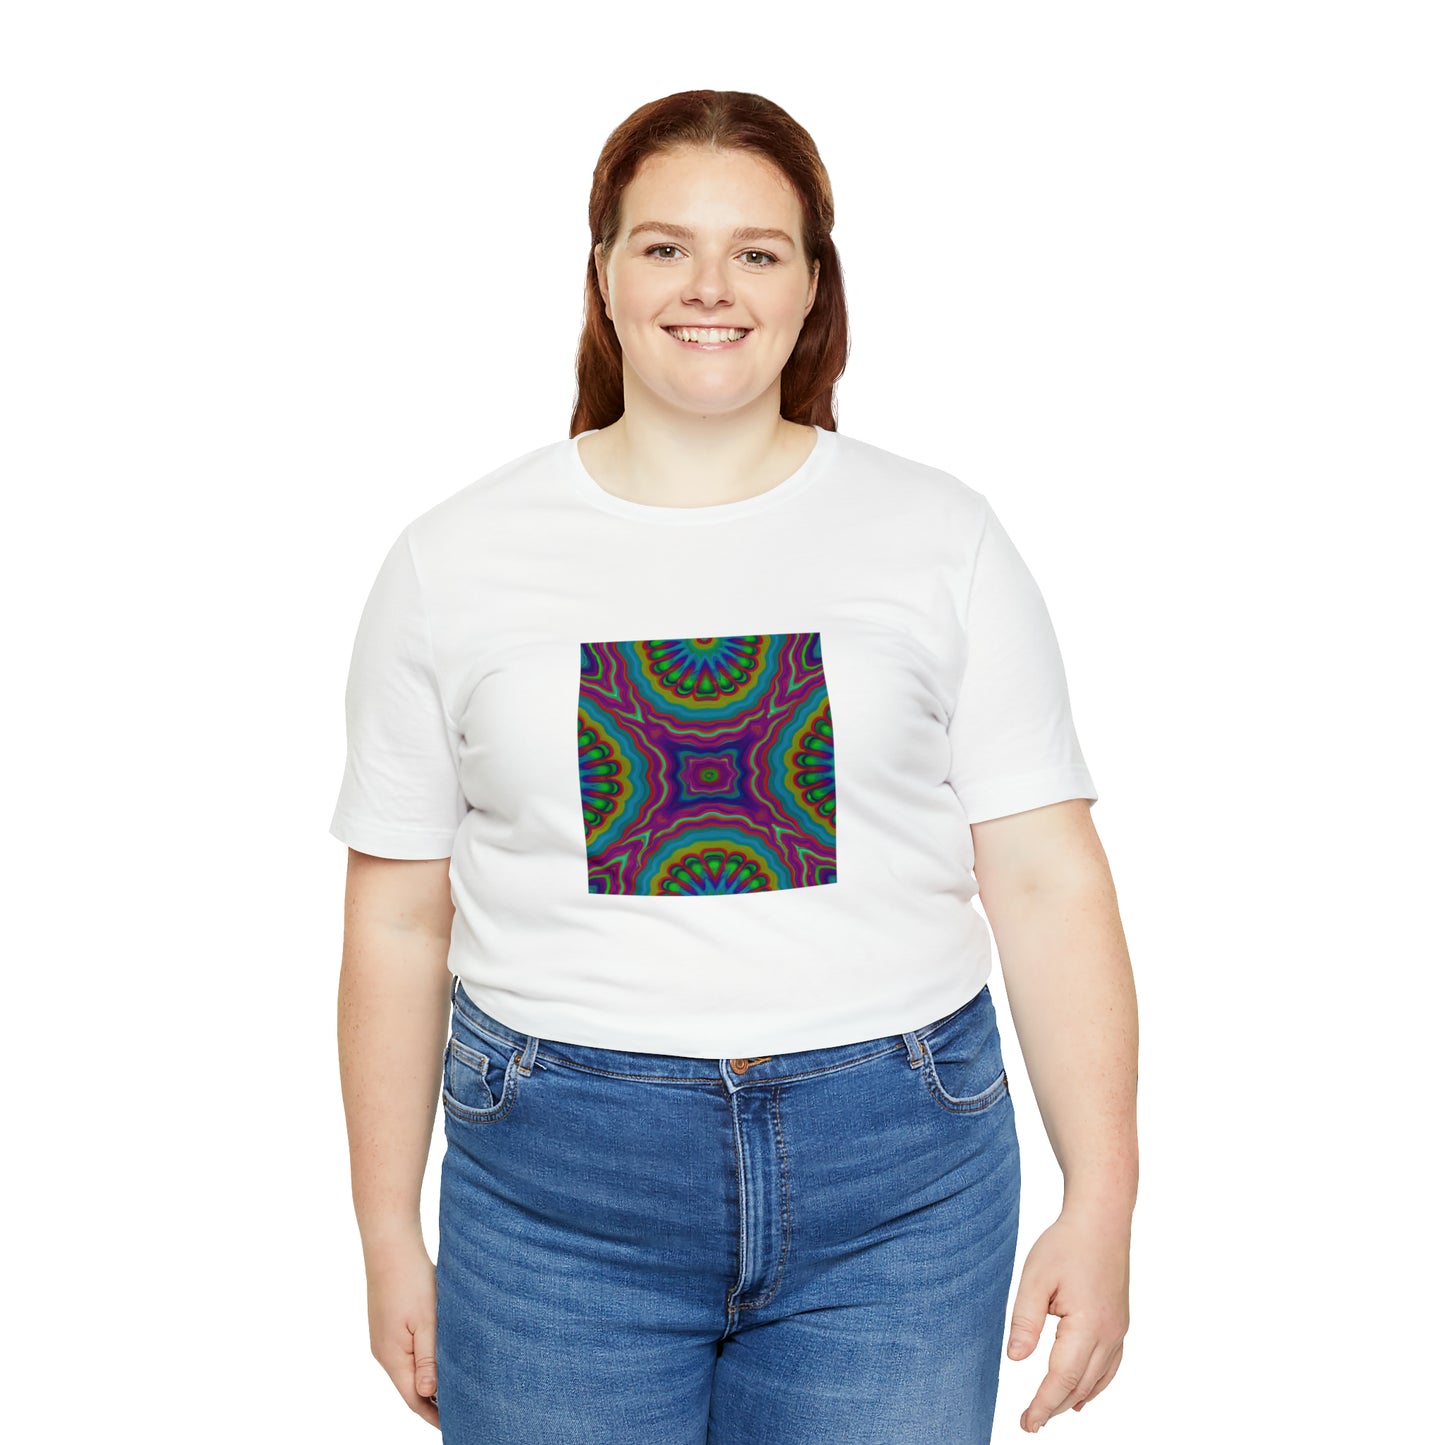 Lulu French - Psychedelic Trippy Pattern Tee Shirt